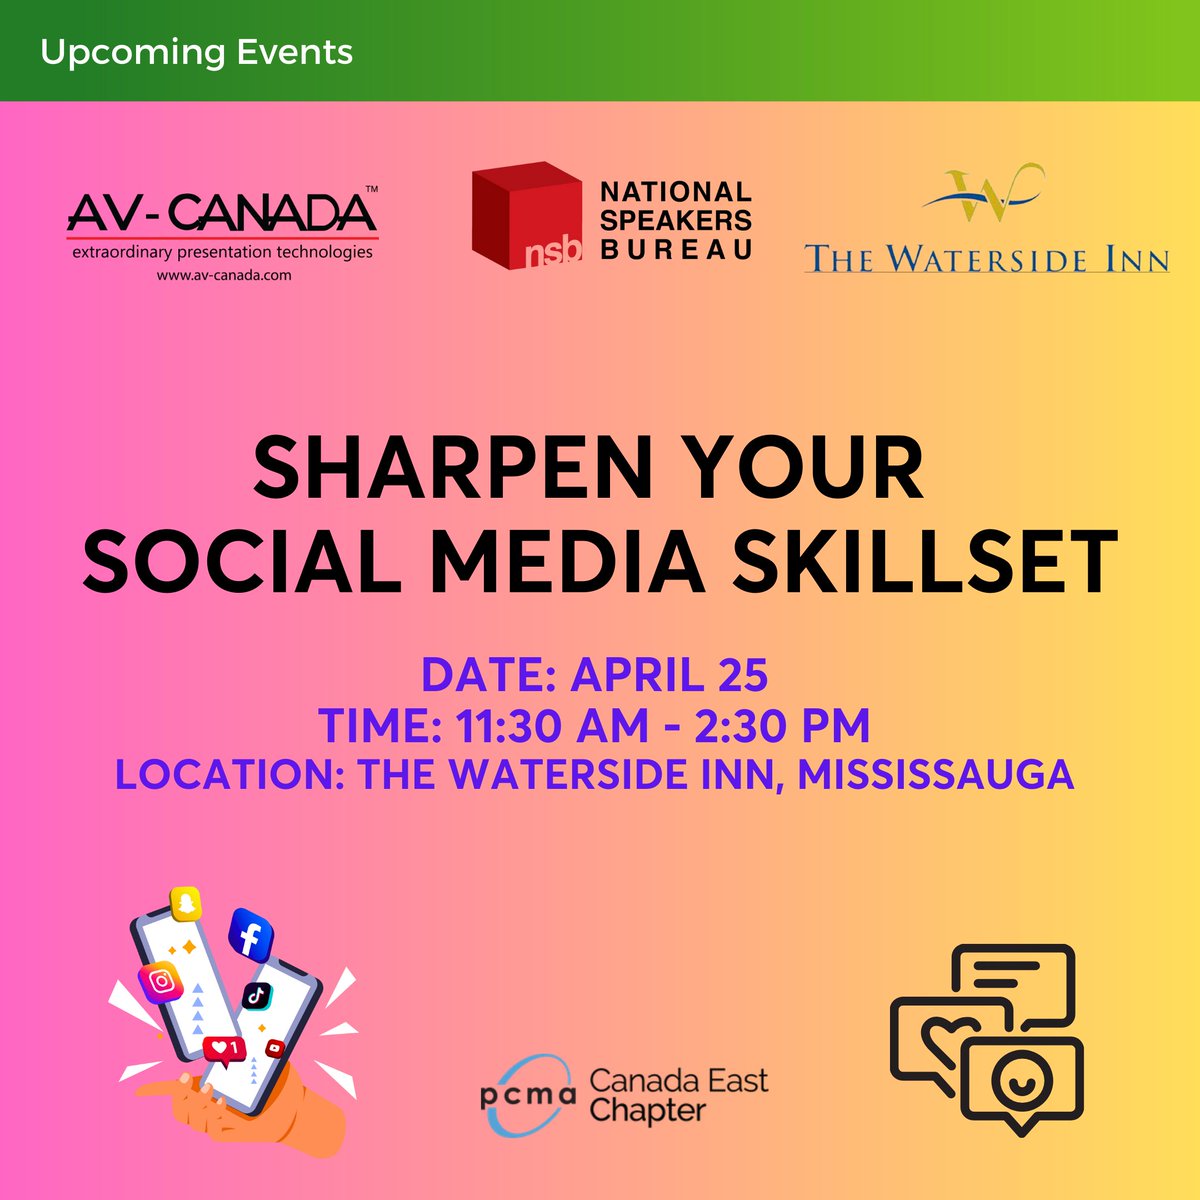 Join us for PCMA CE’s next Education event and kick your social media skills up a notch! Registration today👉 buff.ly/3Zm96bV #PCMA #PCMACE #EventProfs #MeetingProfs